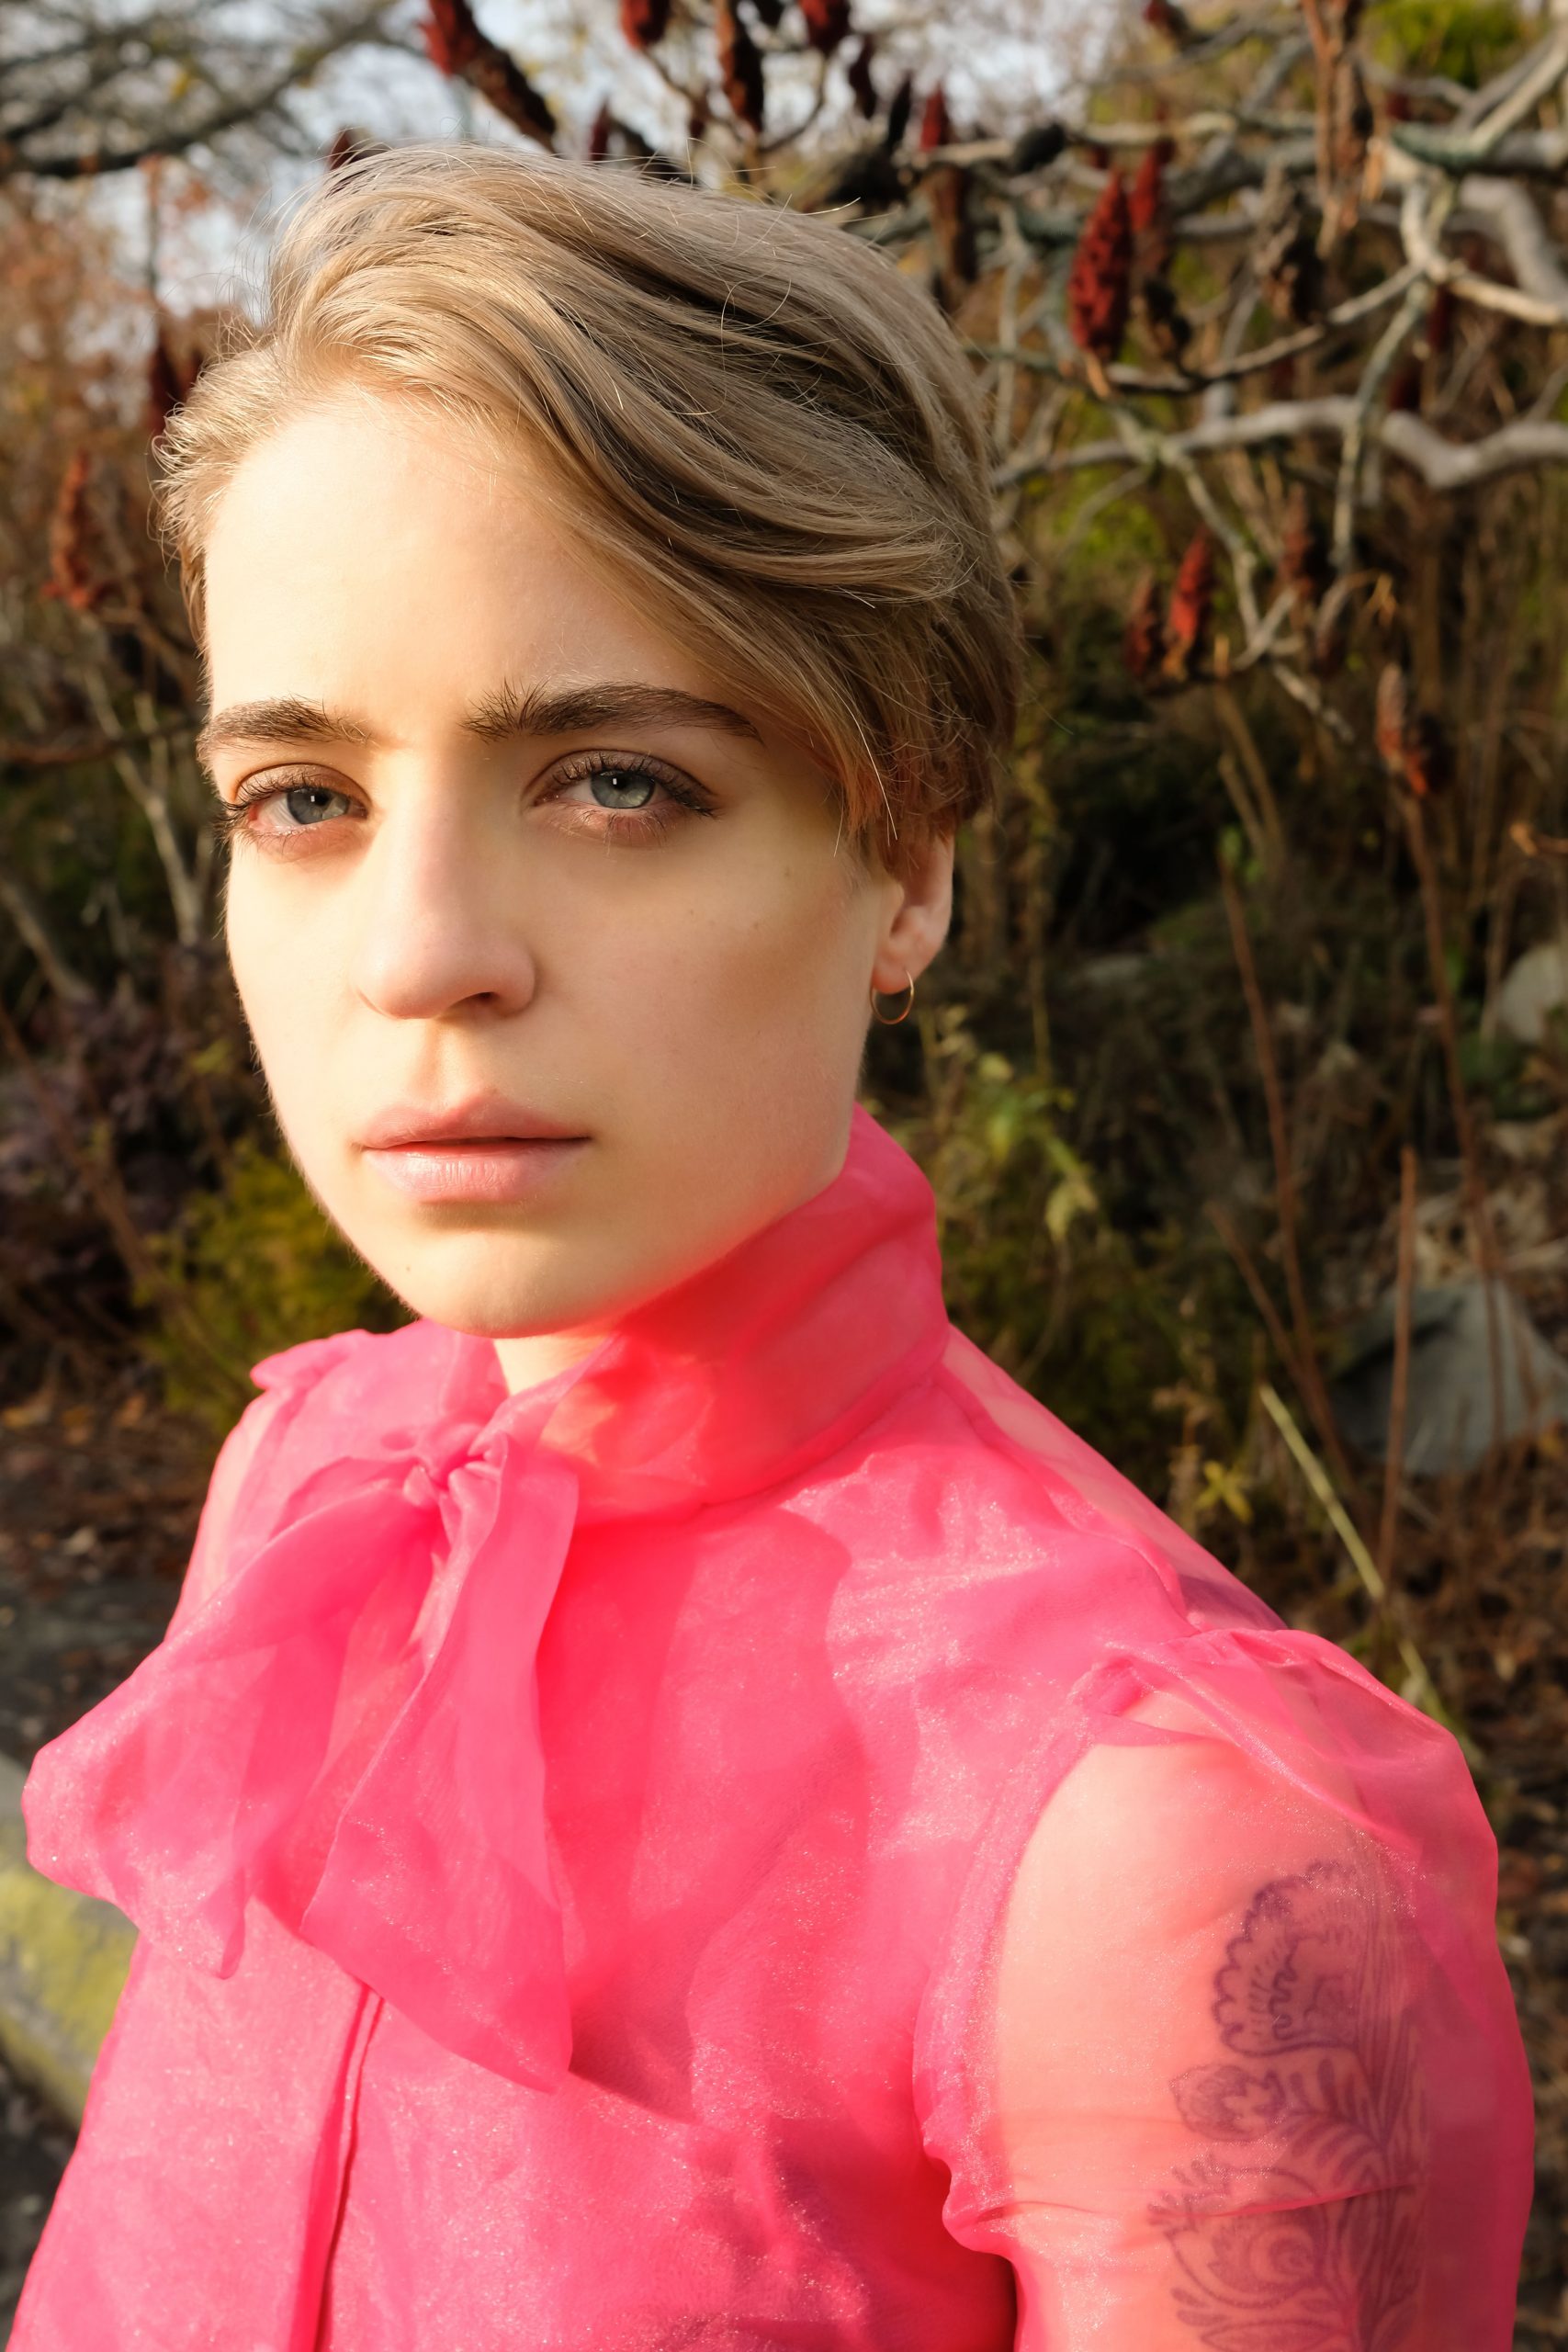 Anais West stands outdoors, pictured from the sternum up, looking into the camera. They have blond hair and blue eyes, and their face is illuminated by the sun on one side as they look intently into the camera. They stand in front of several tress with red flowers, which are just out of focus. Anais wears a sheer hot pink blouse, with capped sleeves and a bow tied around its high neck. A tattoo is just visible beneath the sleeve on Anais' left arm.